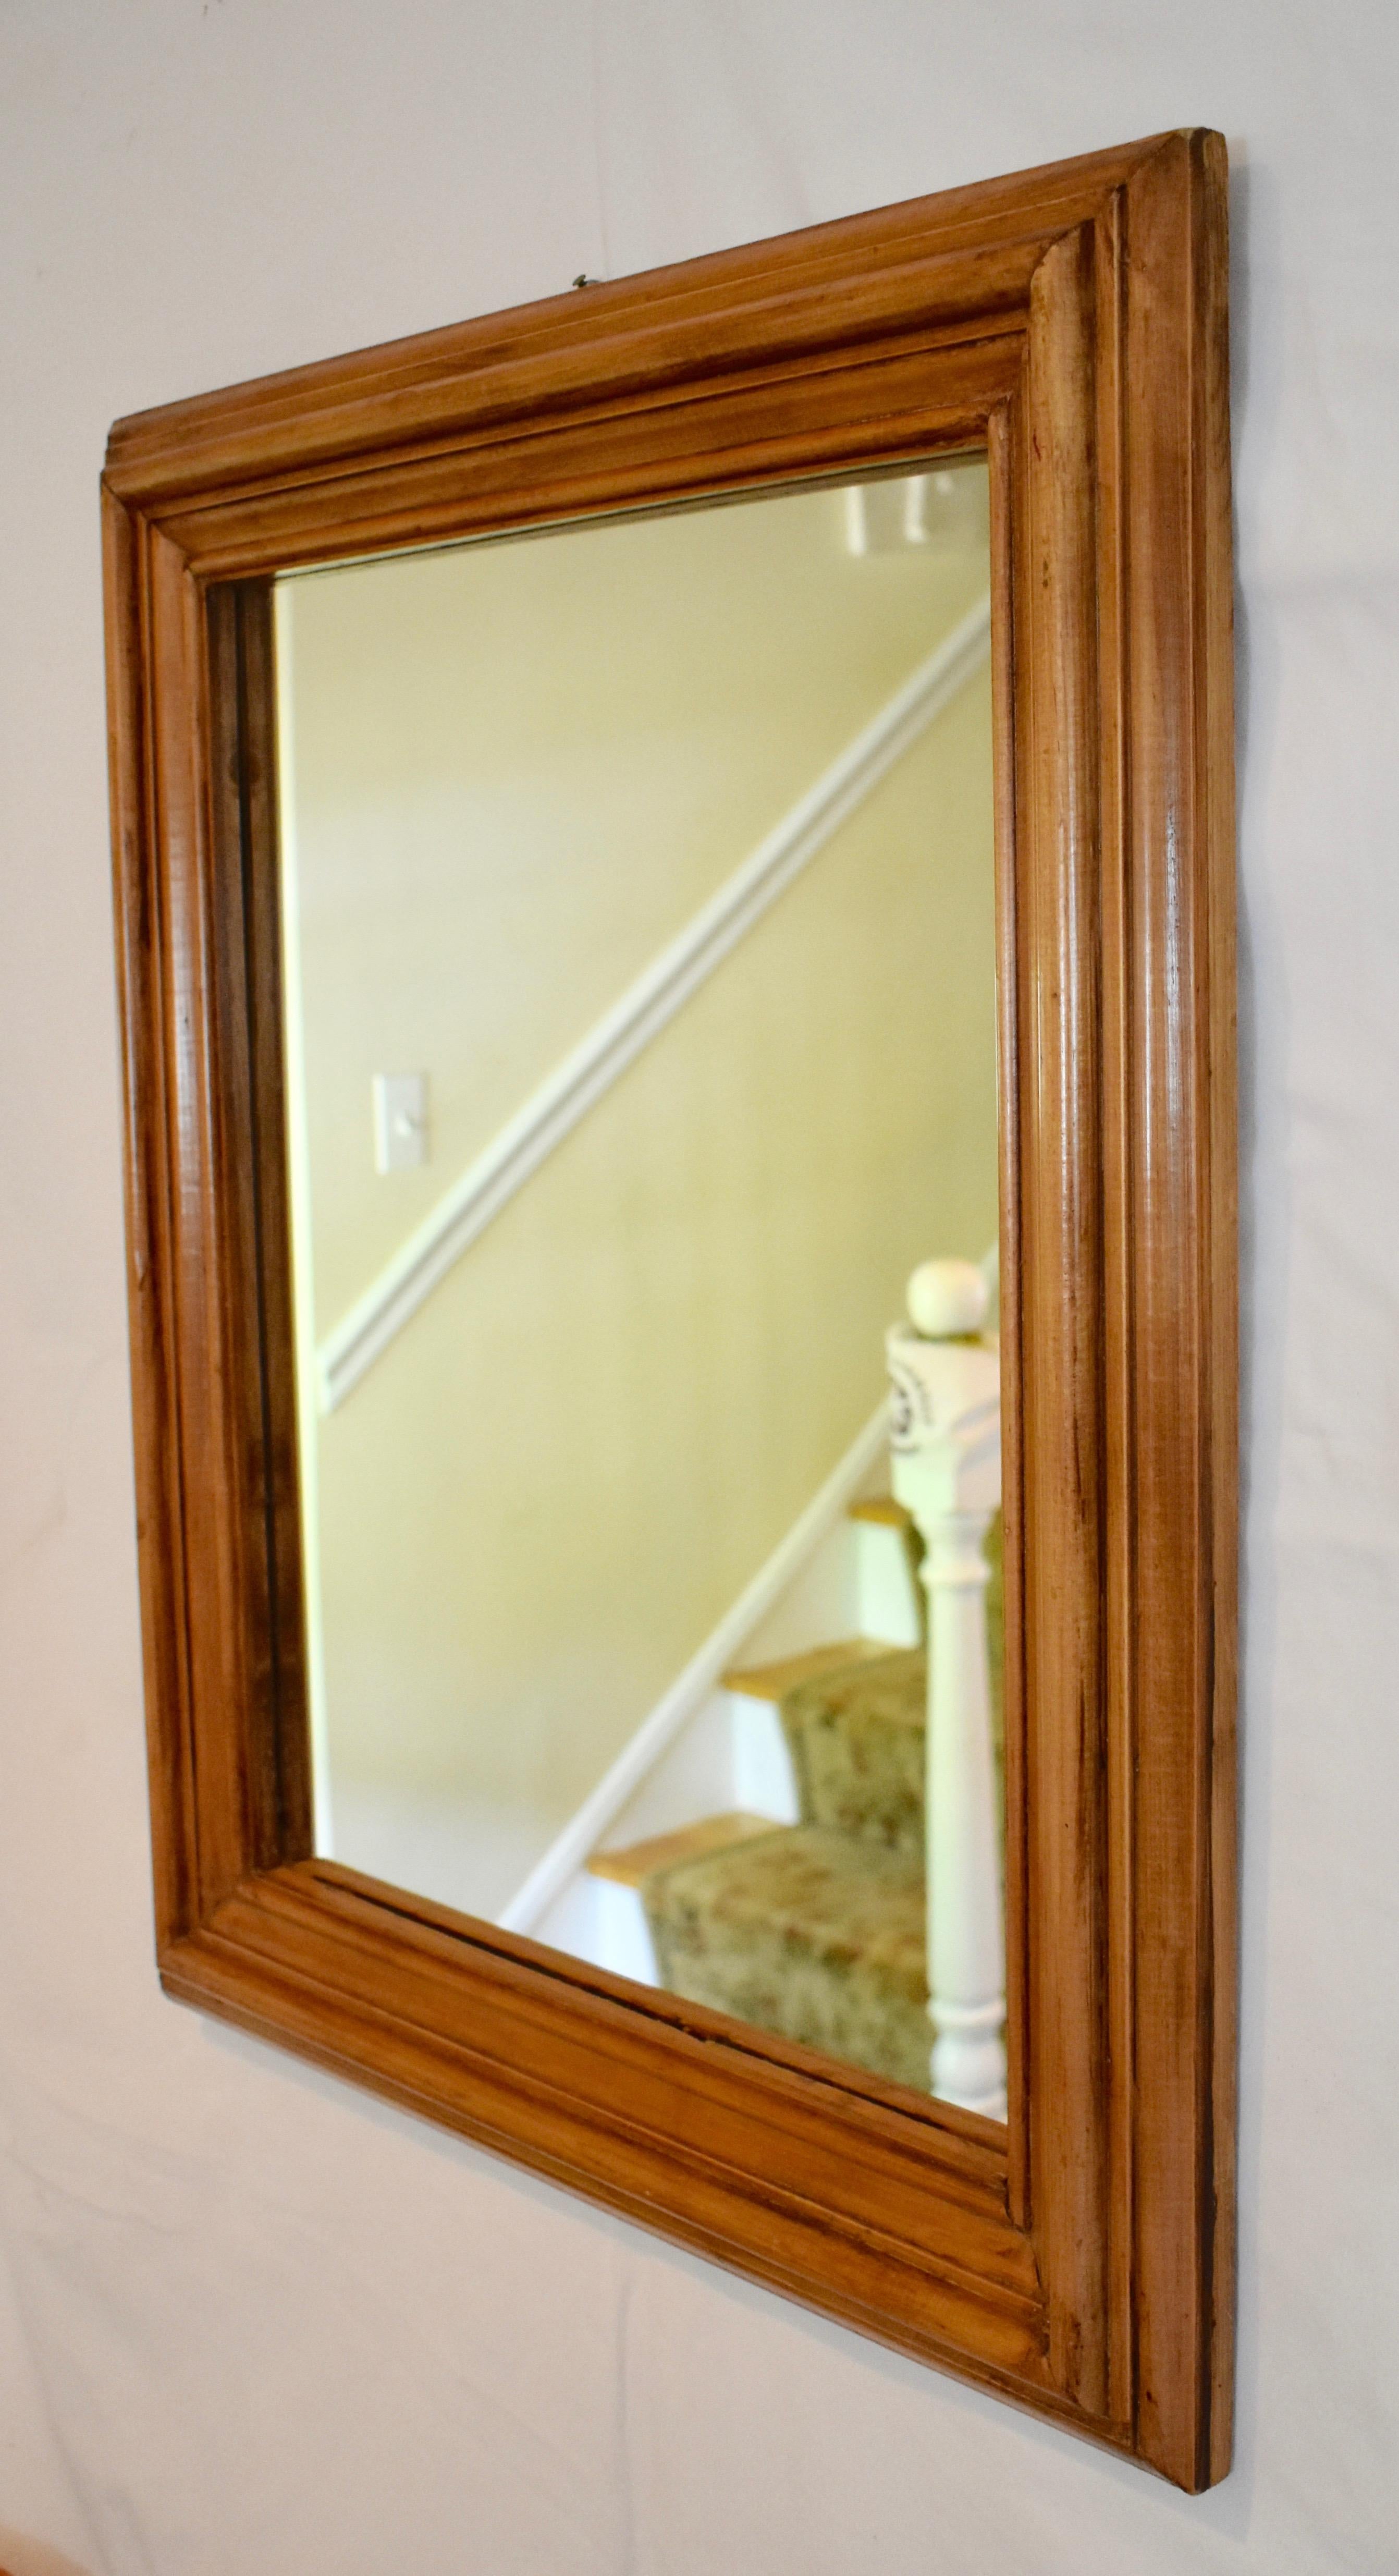 This attractive wall mirror has a nicely-contoured bull-nosed polished pine frame made from reclaimed material. Frame molding is 3